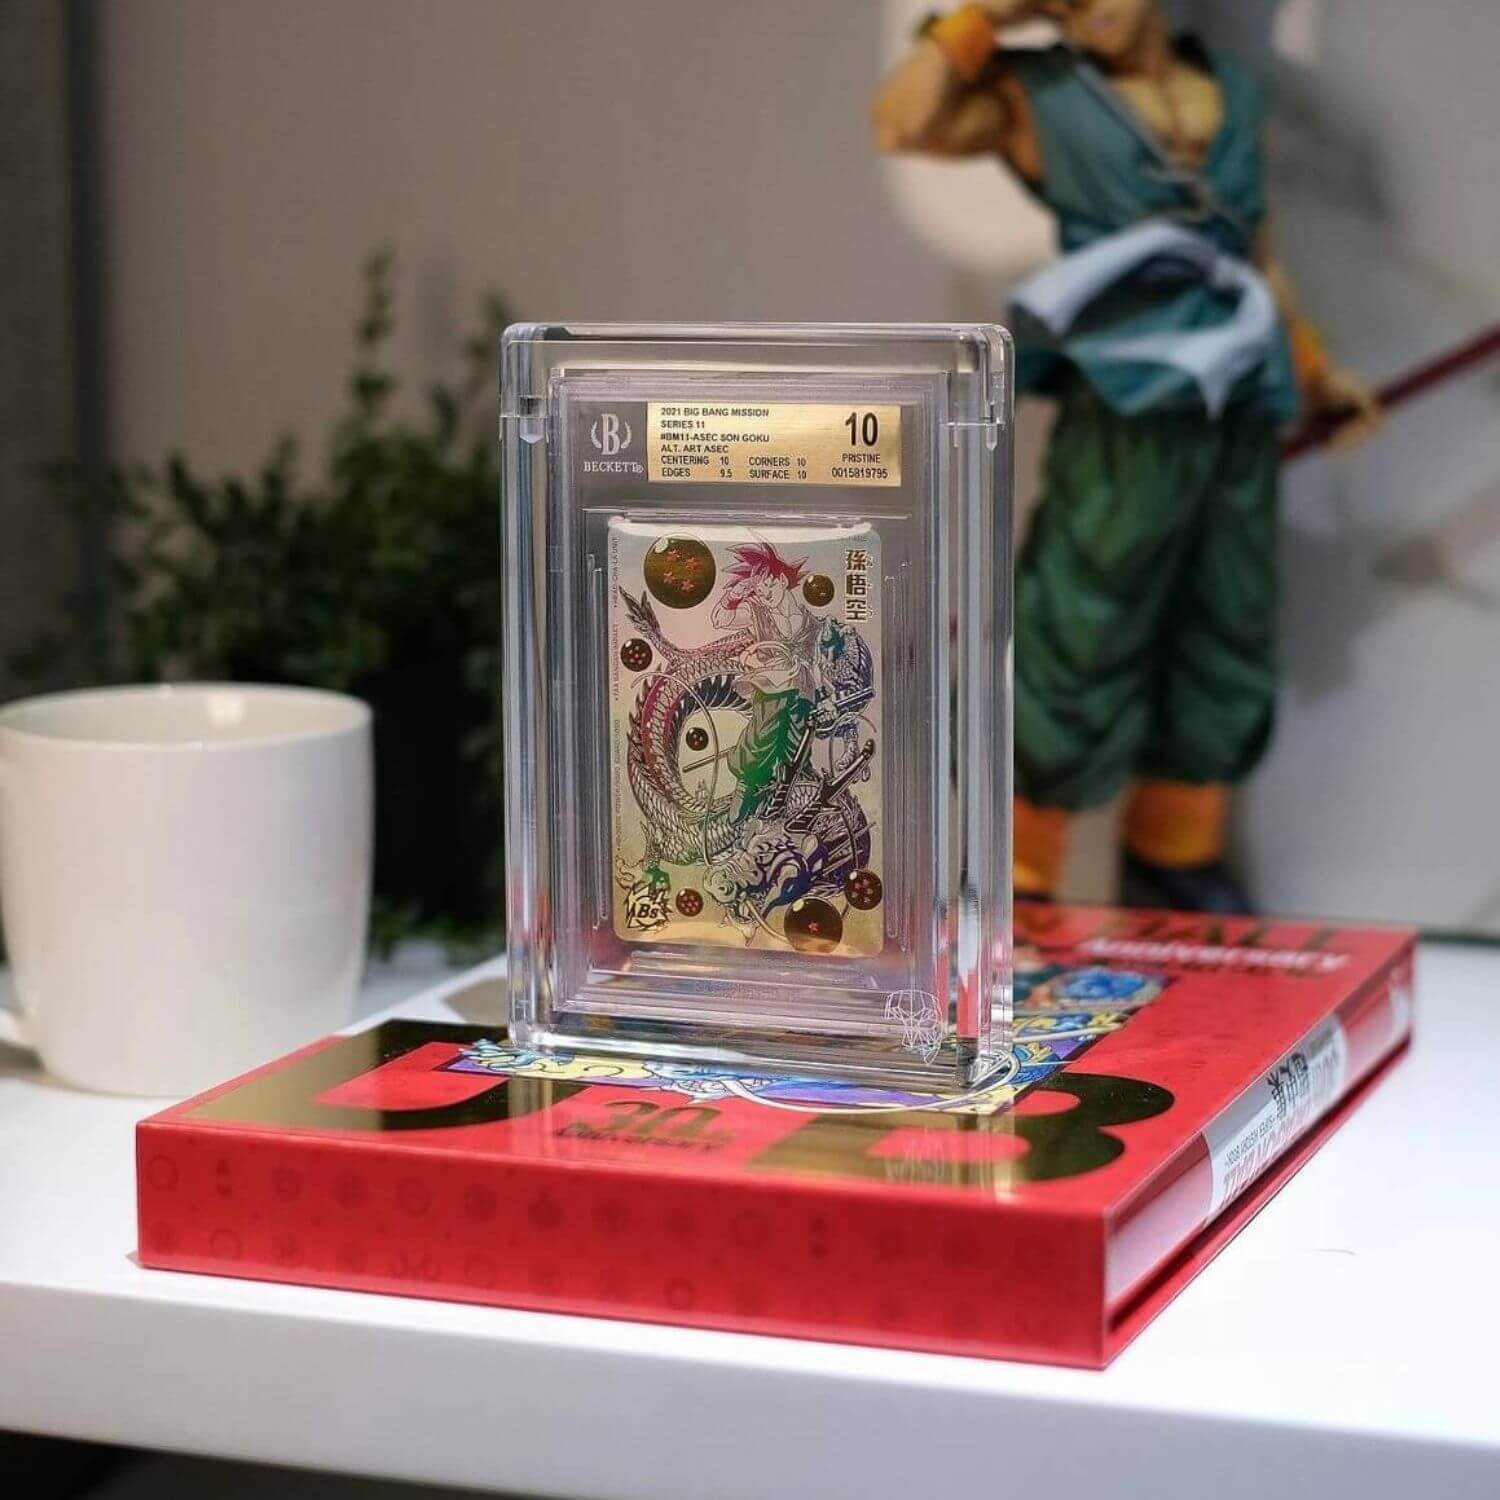 Dragonball Z Card Sitting On Display Shelf In Phantom Ultra Front Angle View